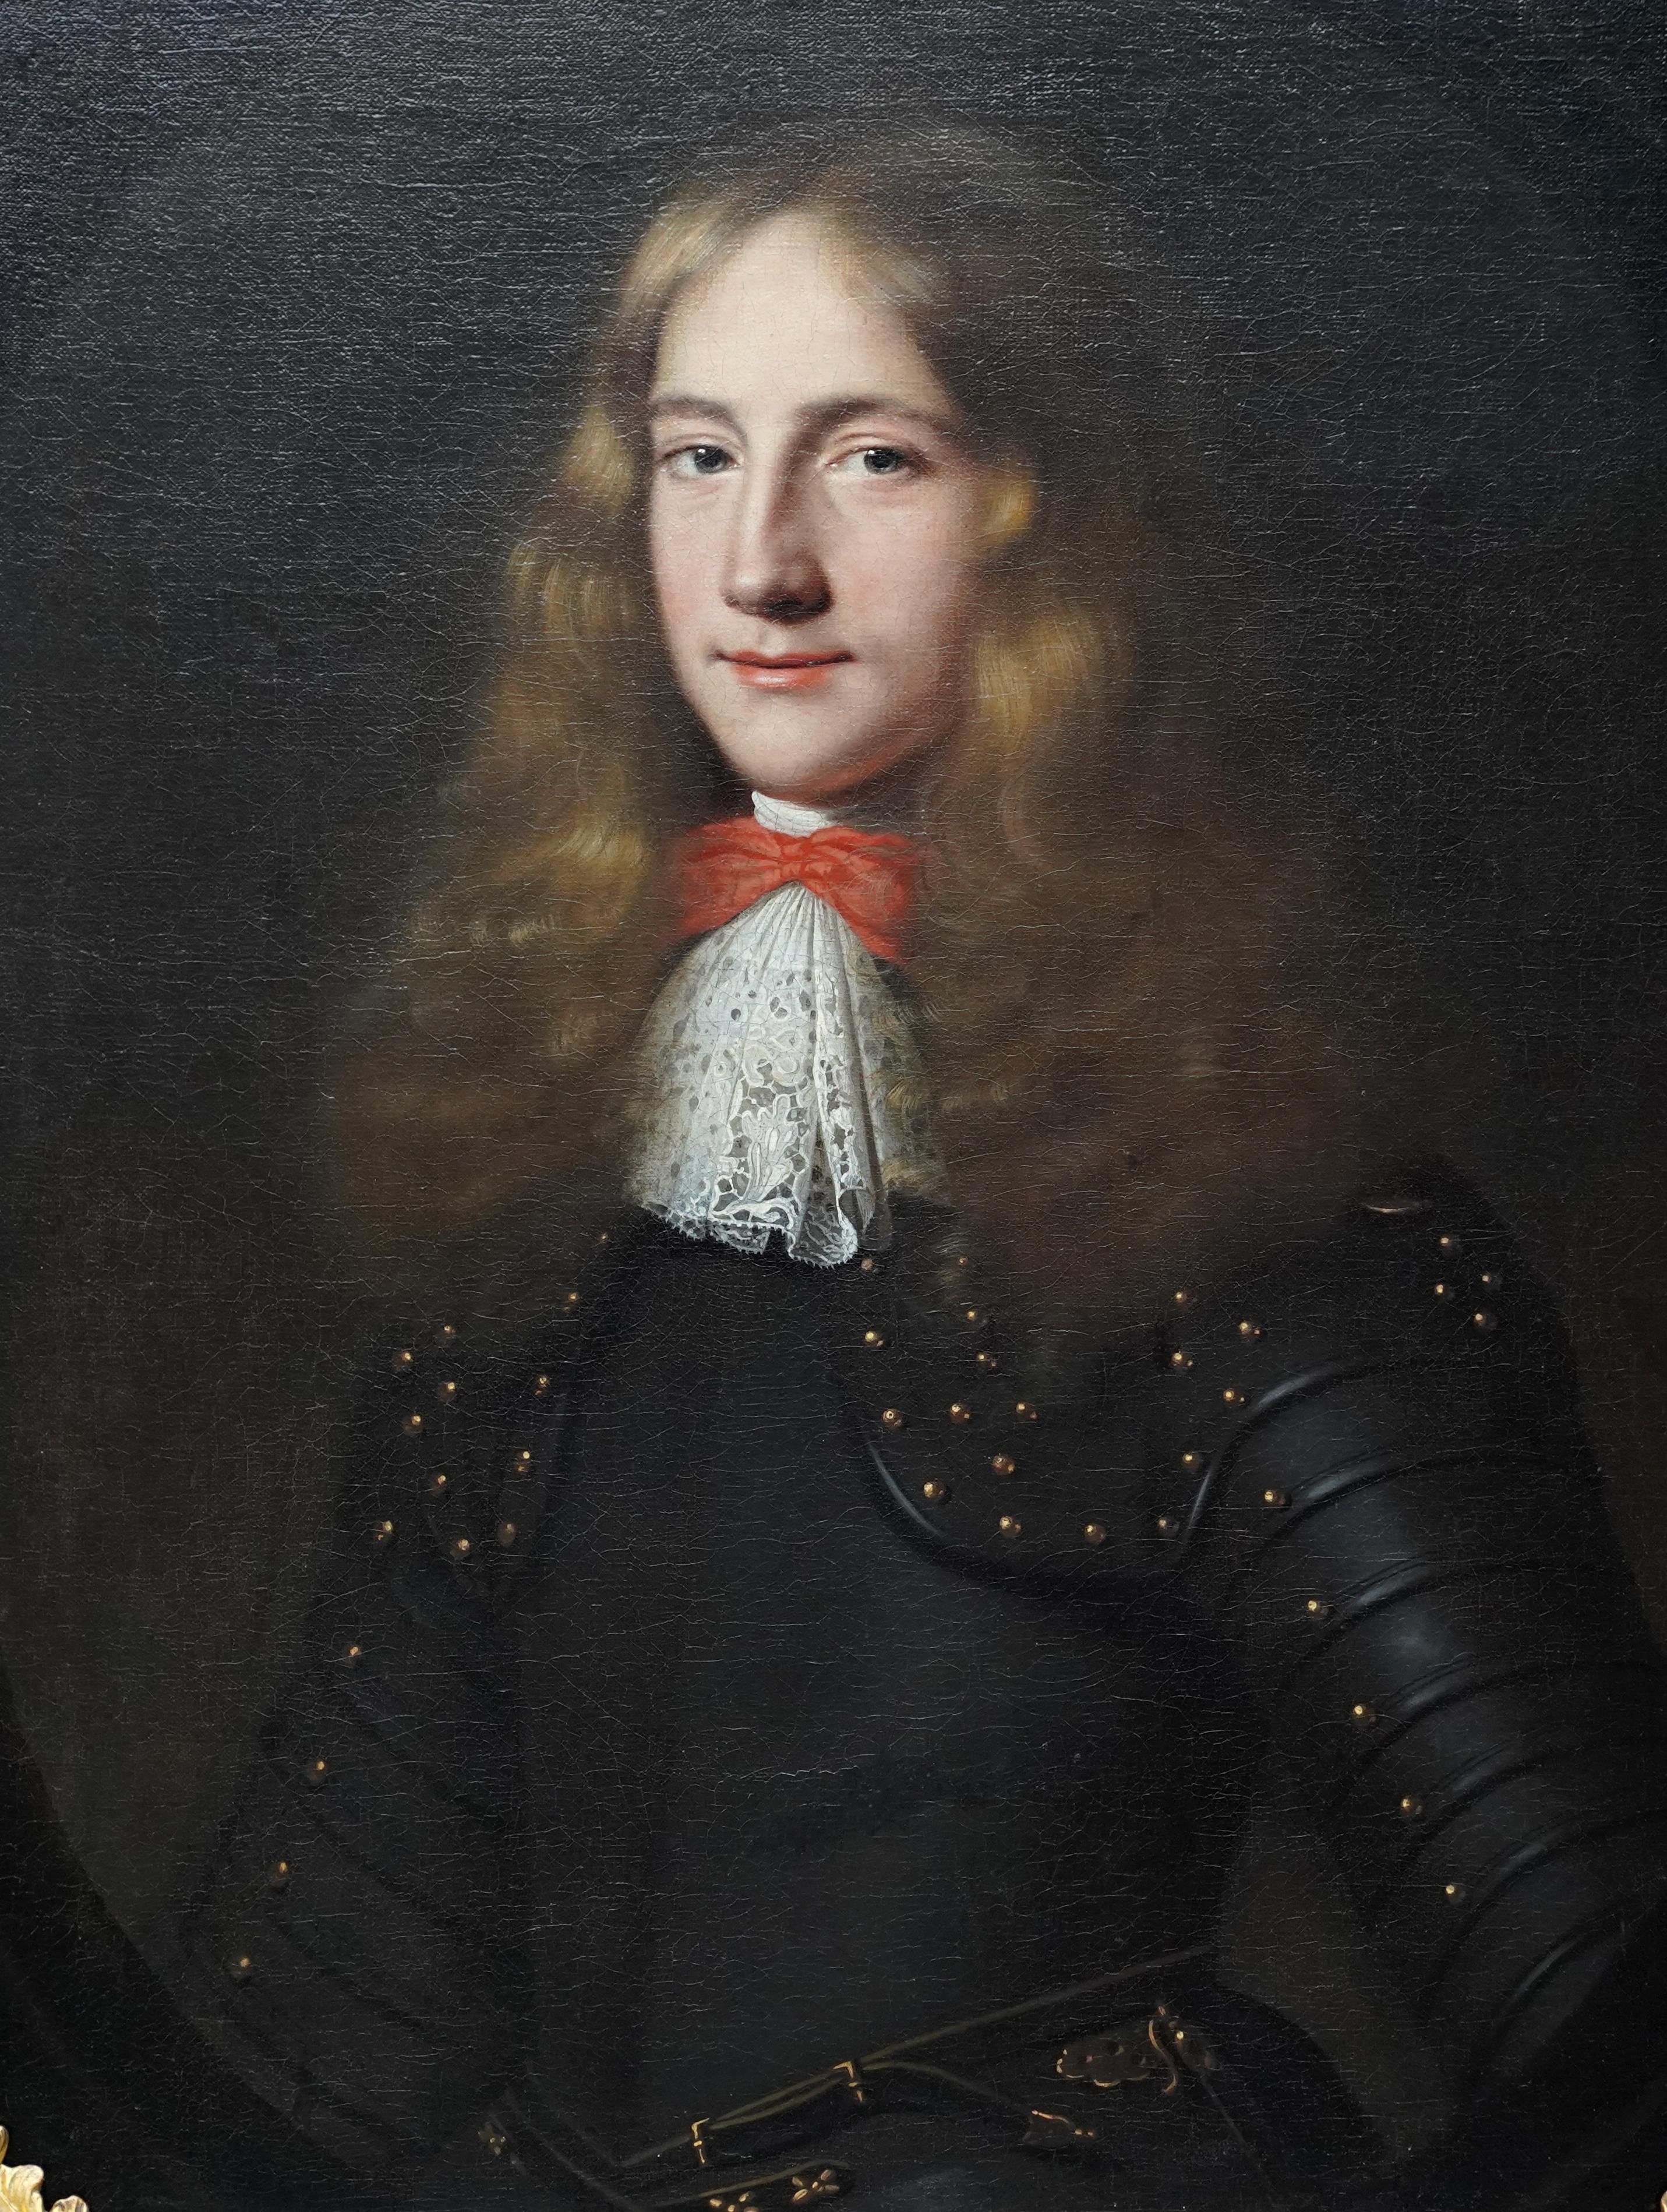 Portrait of a Gentleman in Armour - Flemish 17th Century Old Master oil painting - Painting by Jacob Ferdinand Voet